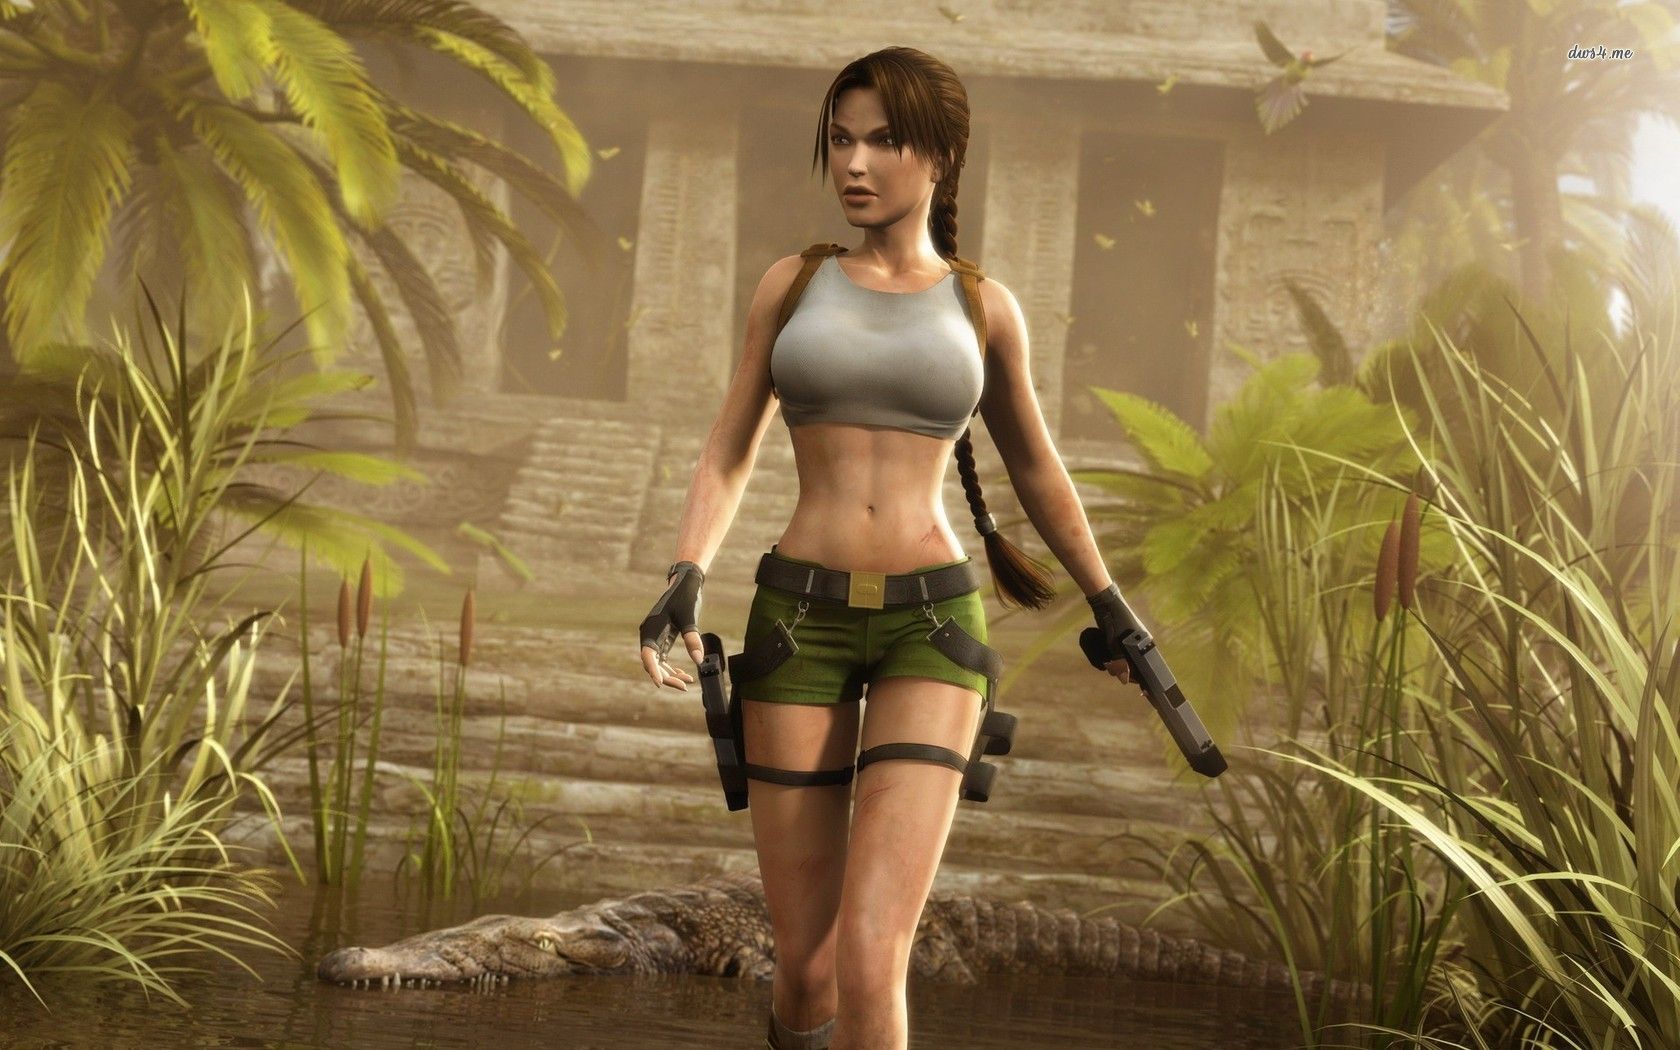 Problematic Characters Players Love- Lara Croft